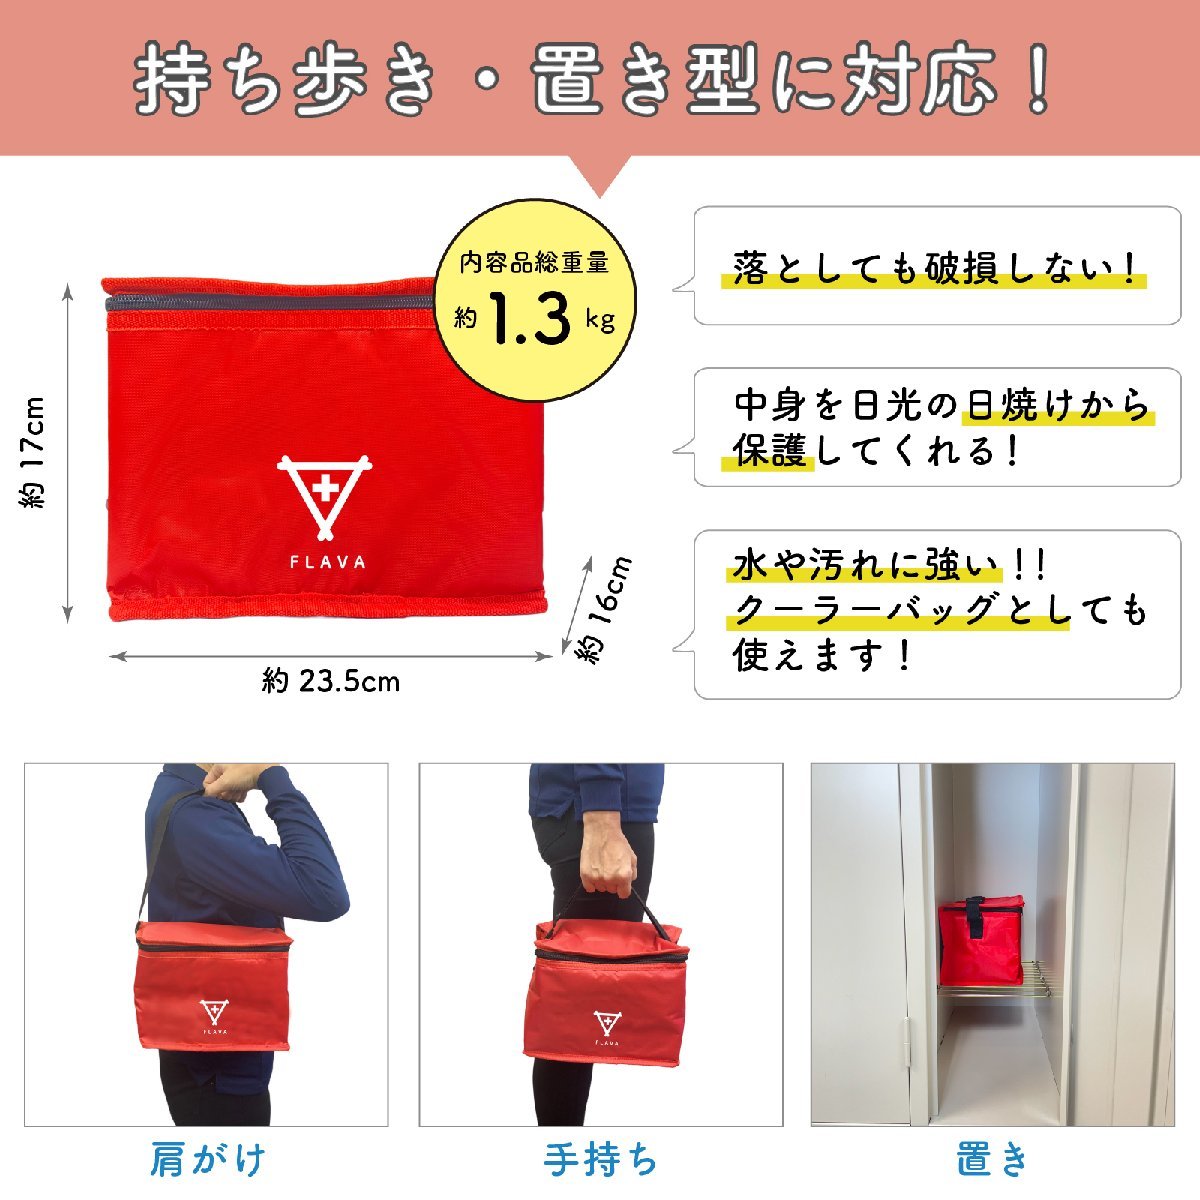 . middle . emergency place . set [ cooling material ... plastic case attaching ]. middle . measures kit emergency place . manual carrying convenient shoulder bag sport site 